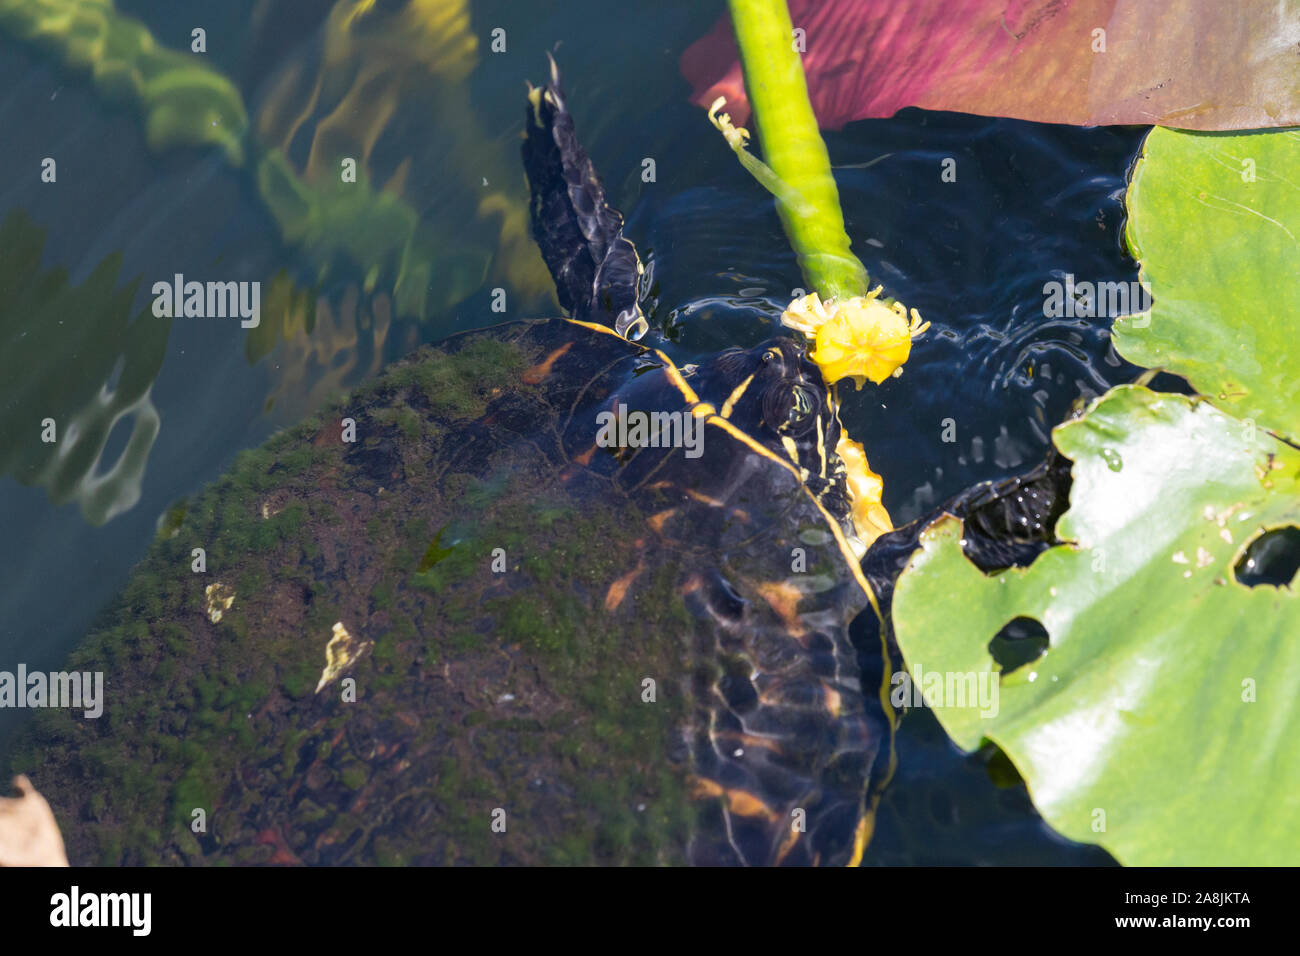 A wild redbellied cooter turtle eating a plant in Everglades National Park (Florida). Stock Photo